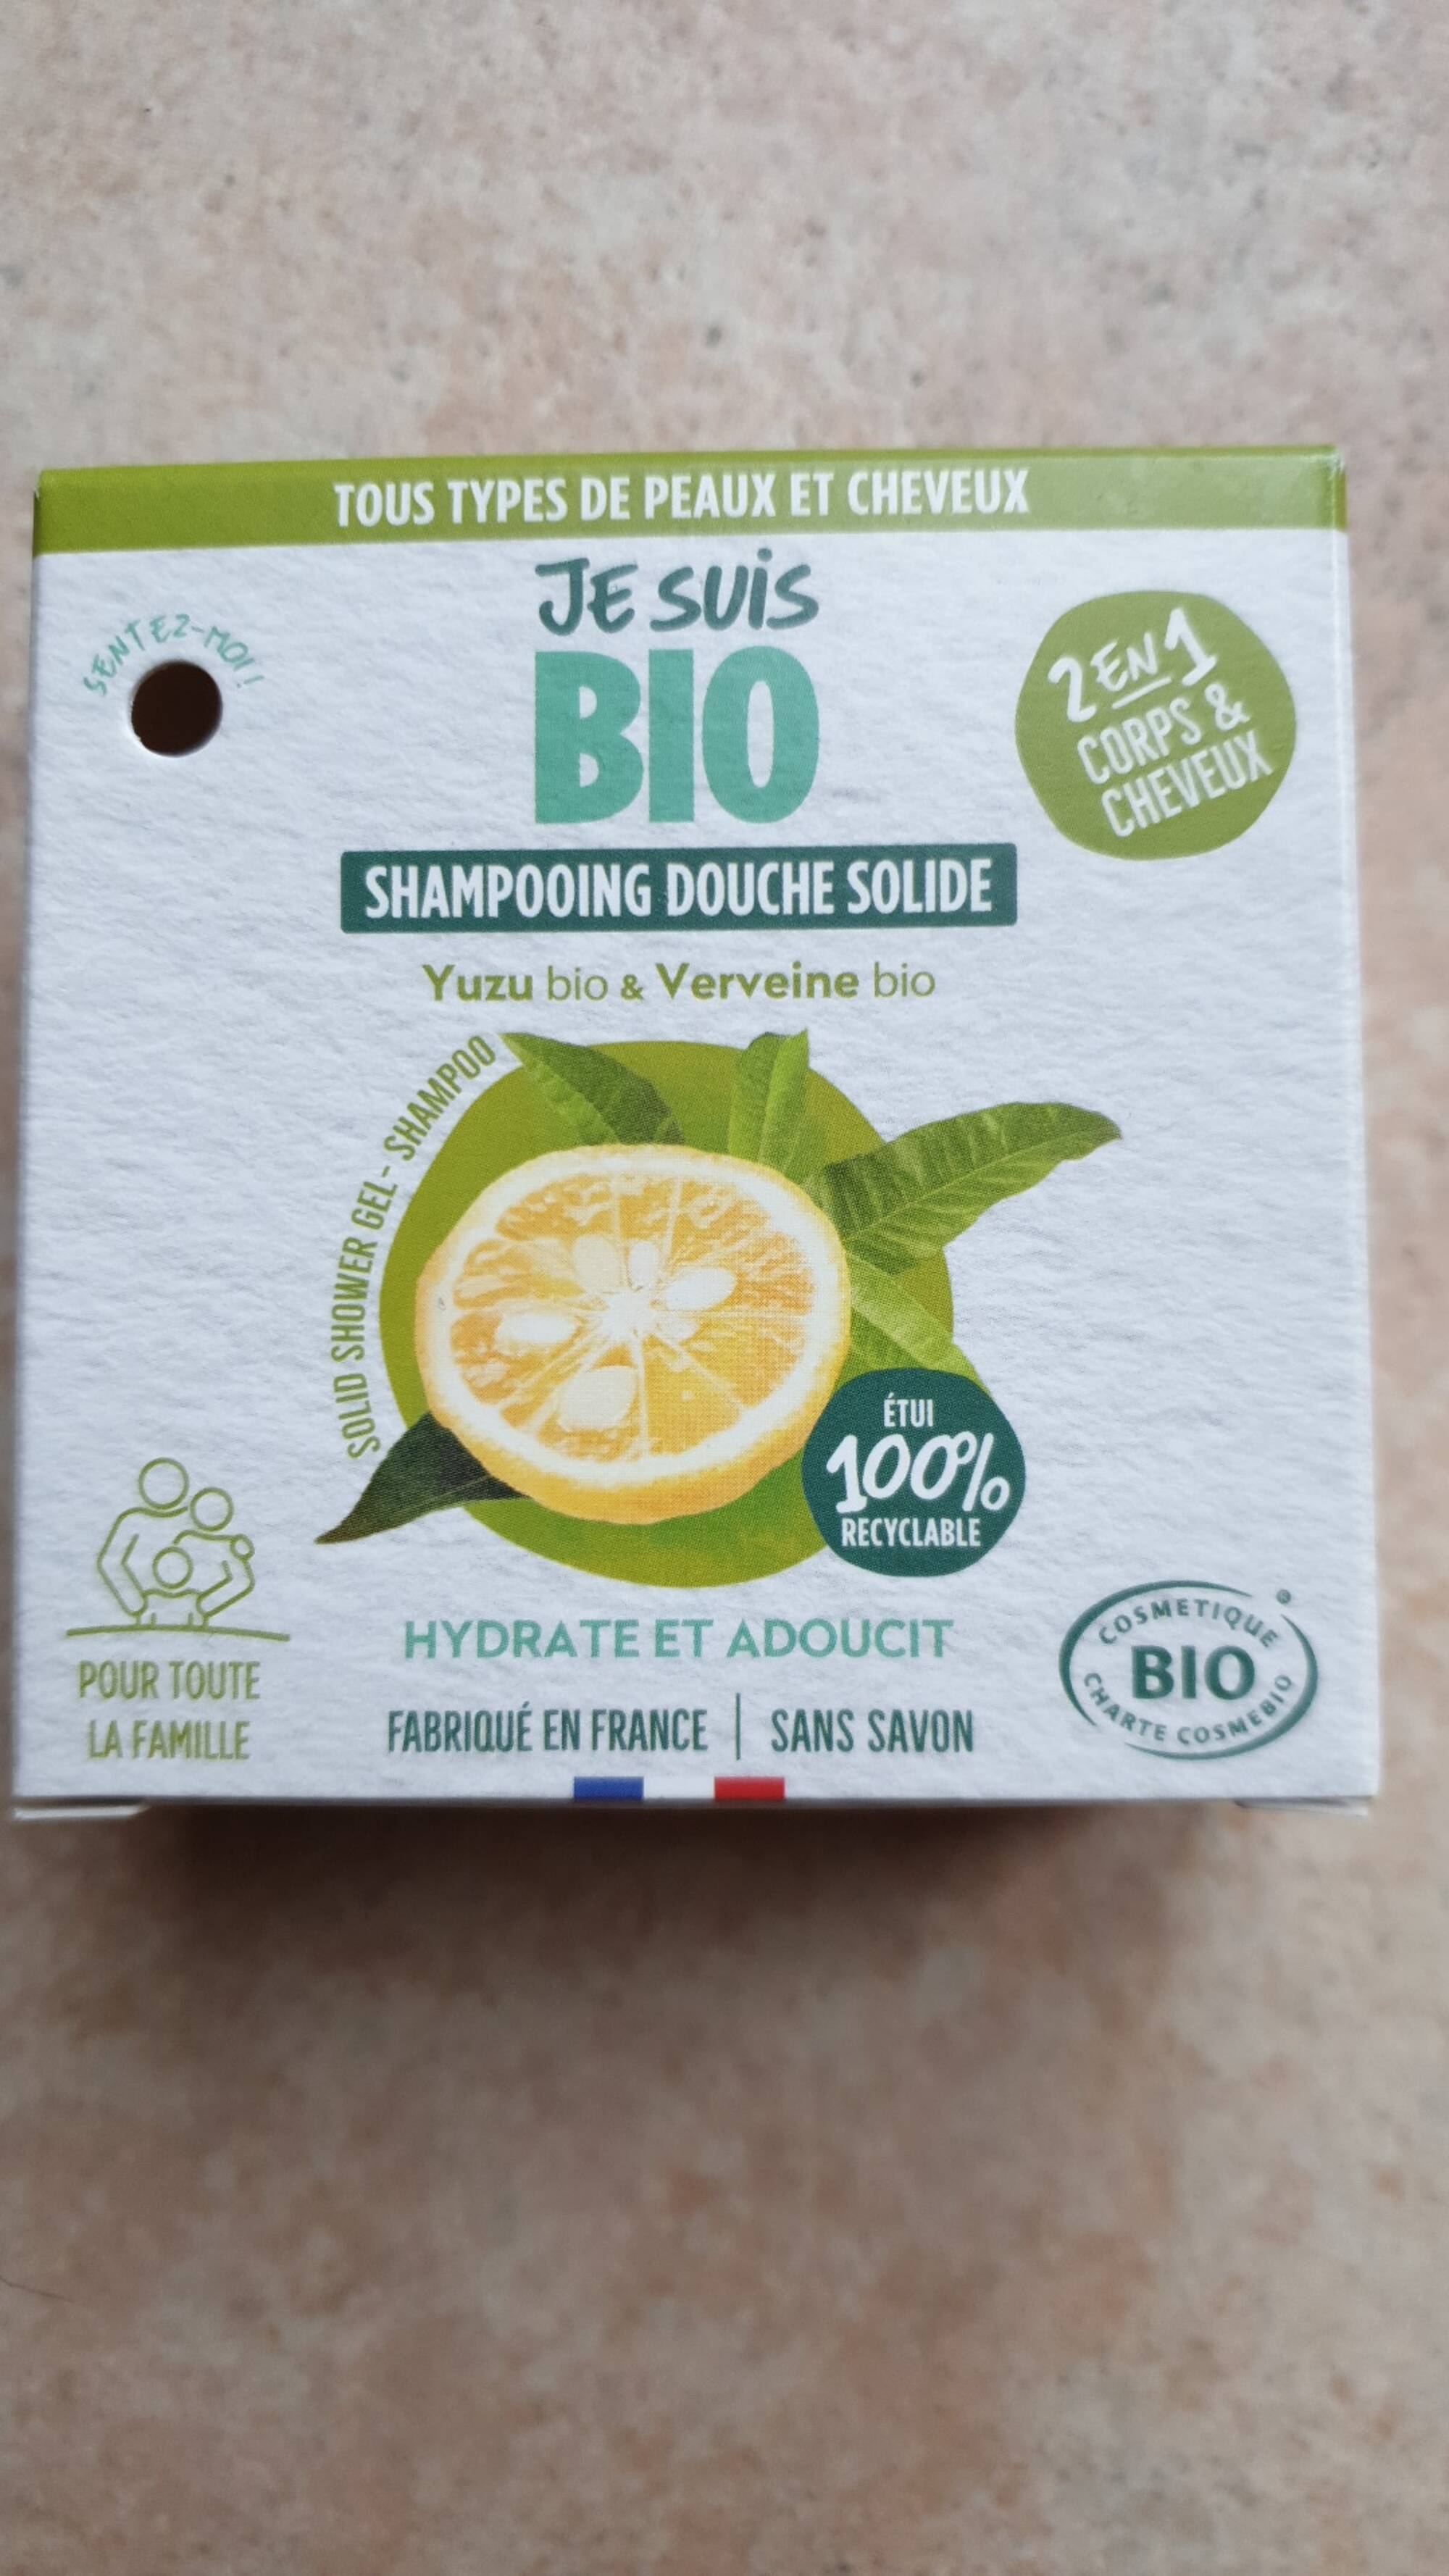 JE SUIS BIO - Shampooing douche solide 